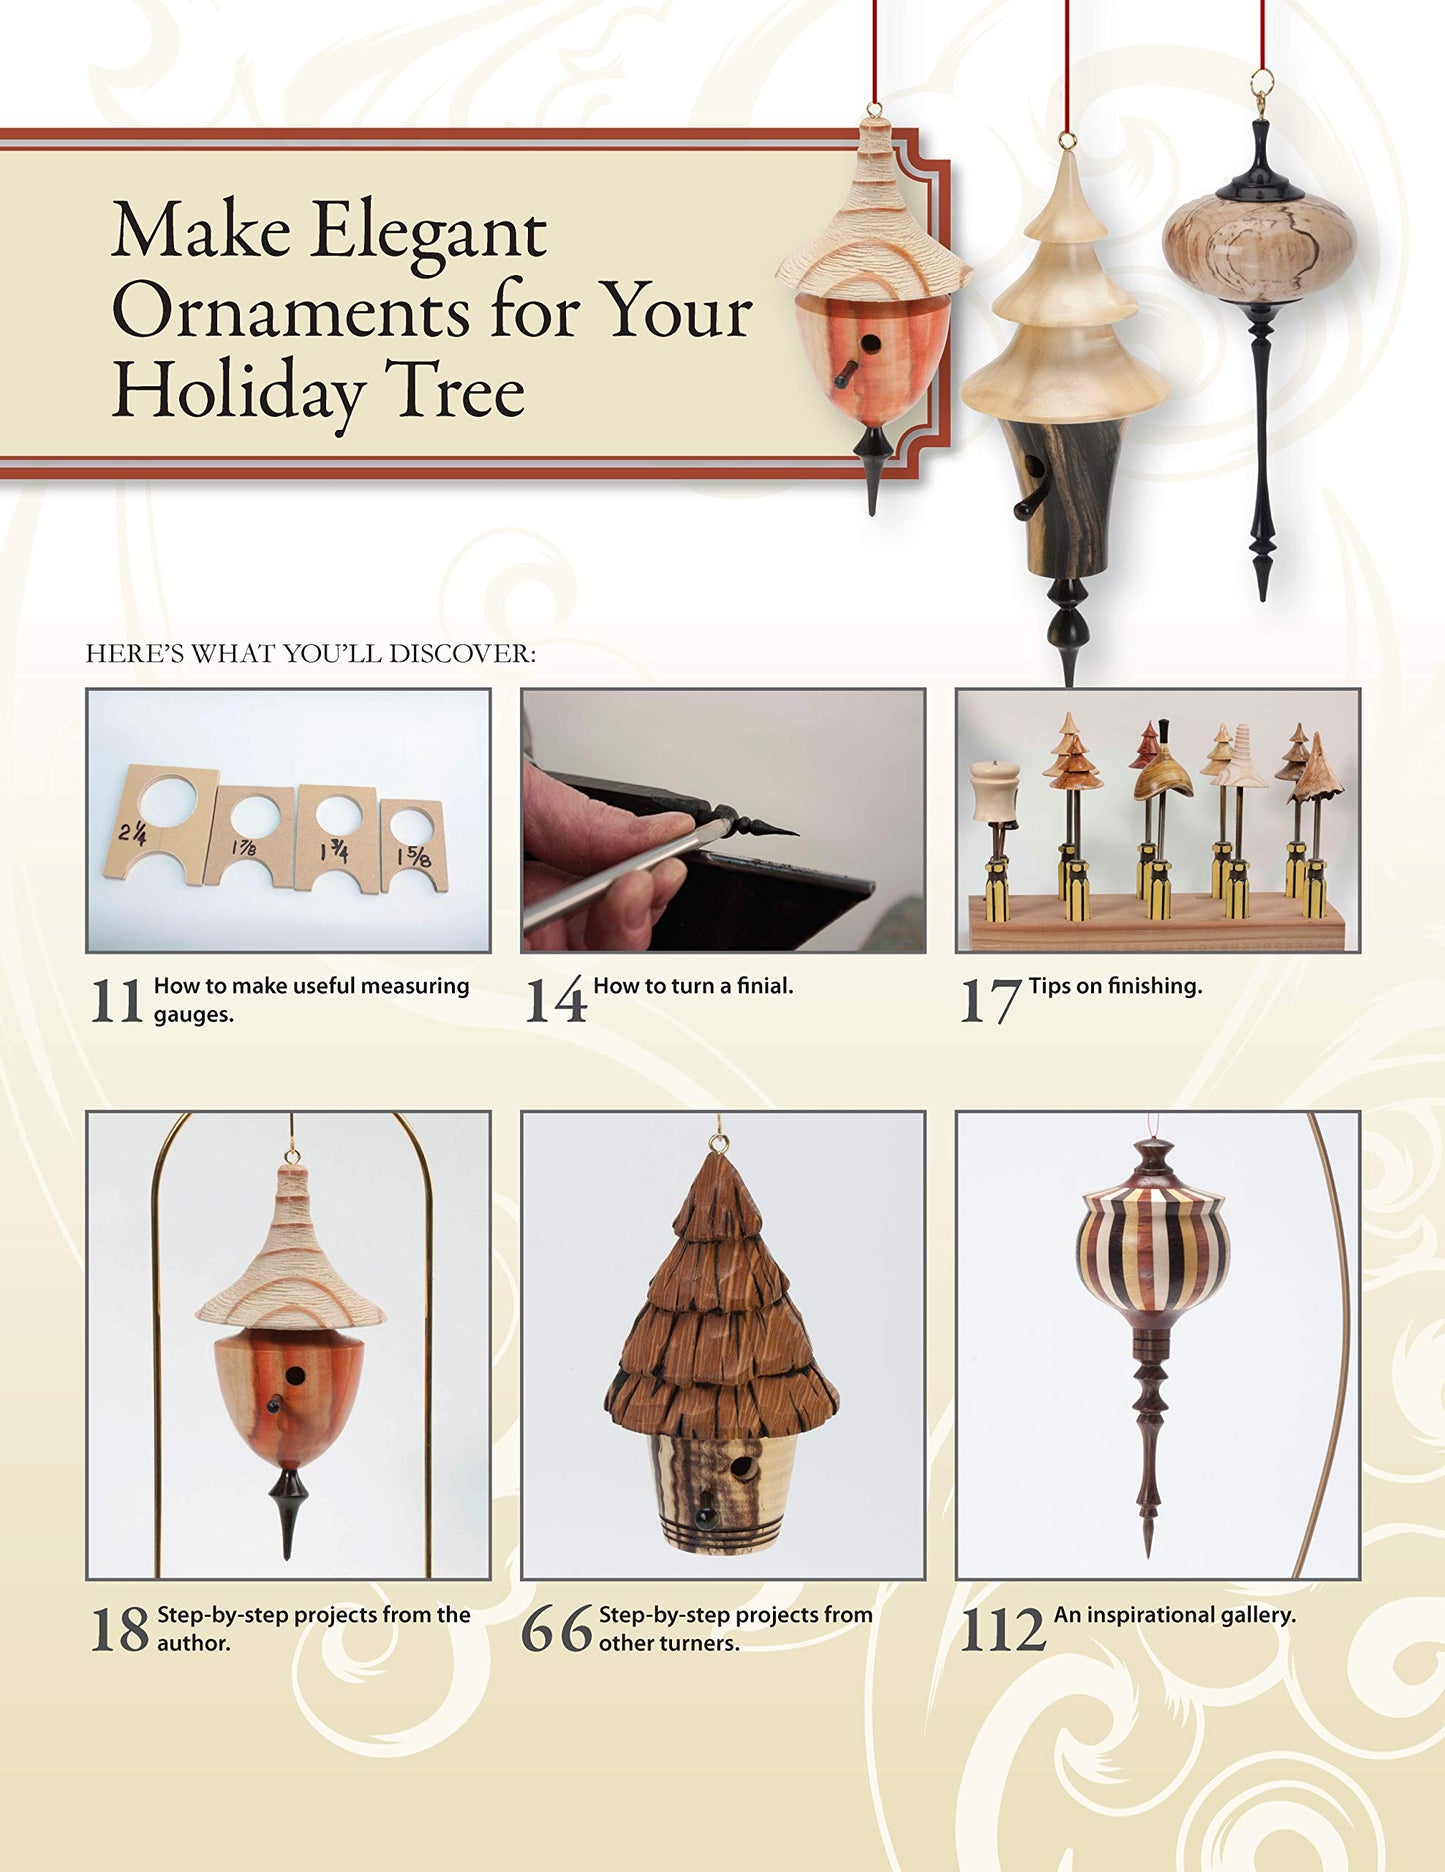 Woodturning Christmas Ornaments with Dale L. Nish (Fox Chapel Publishing) Step-by-Step Instructions & Photos for 12 Elegant Wood-Turned Pieces to